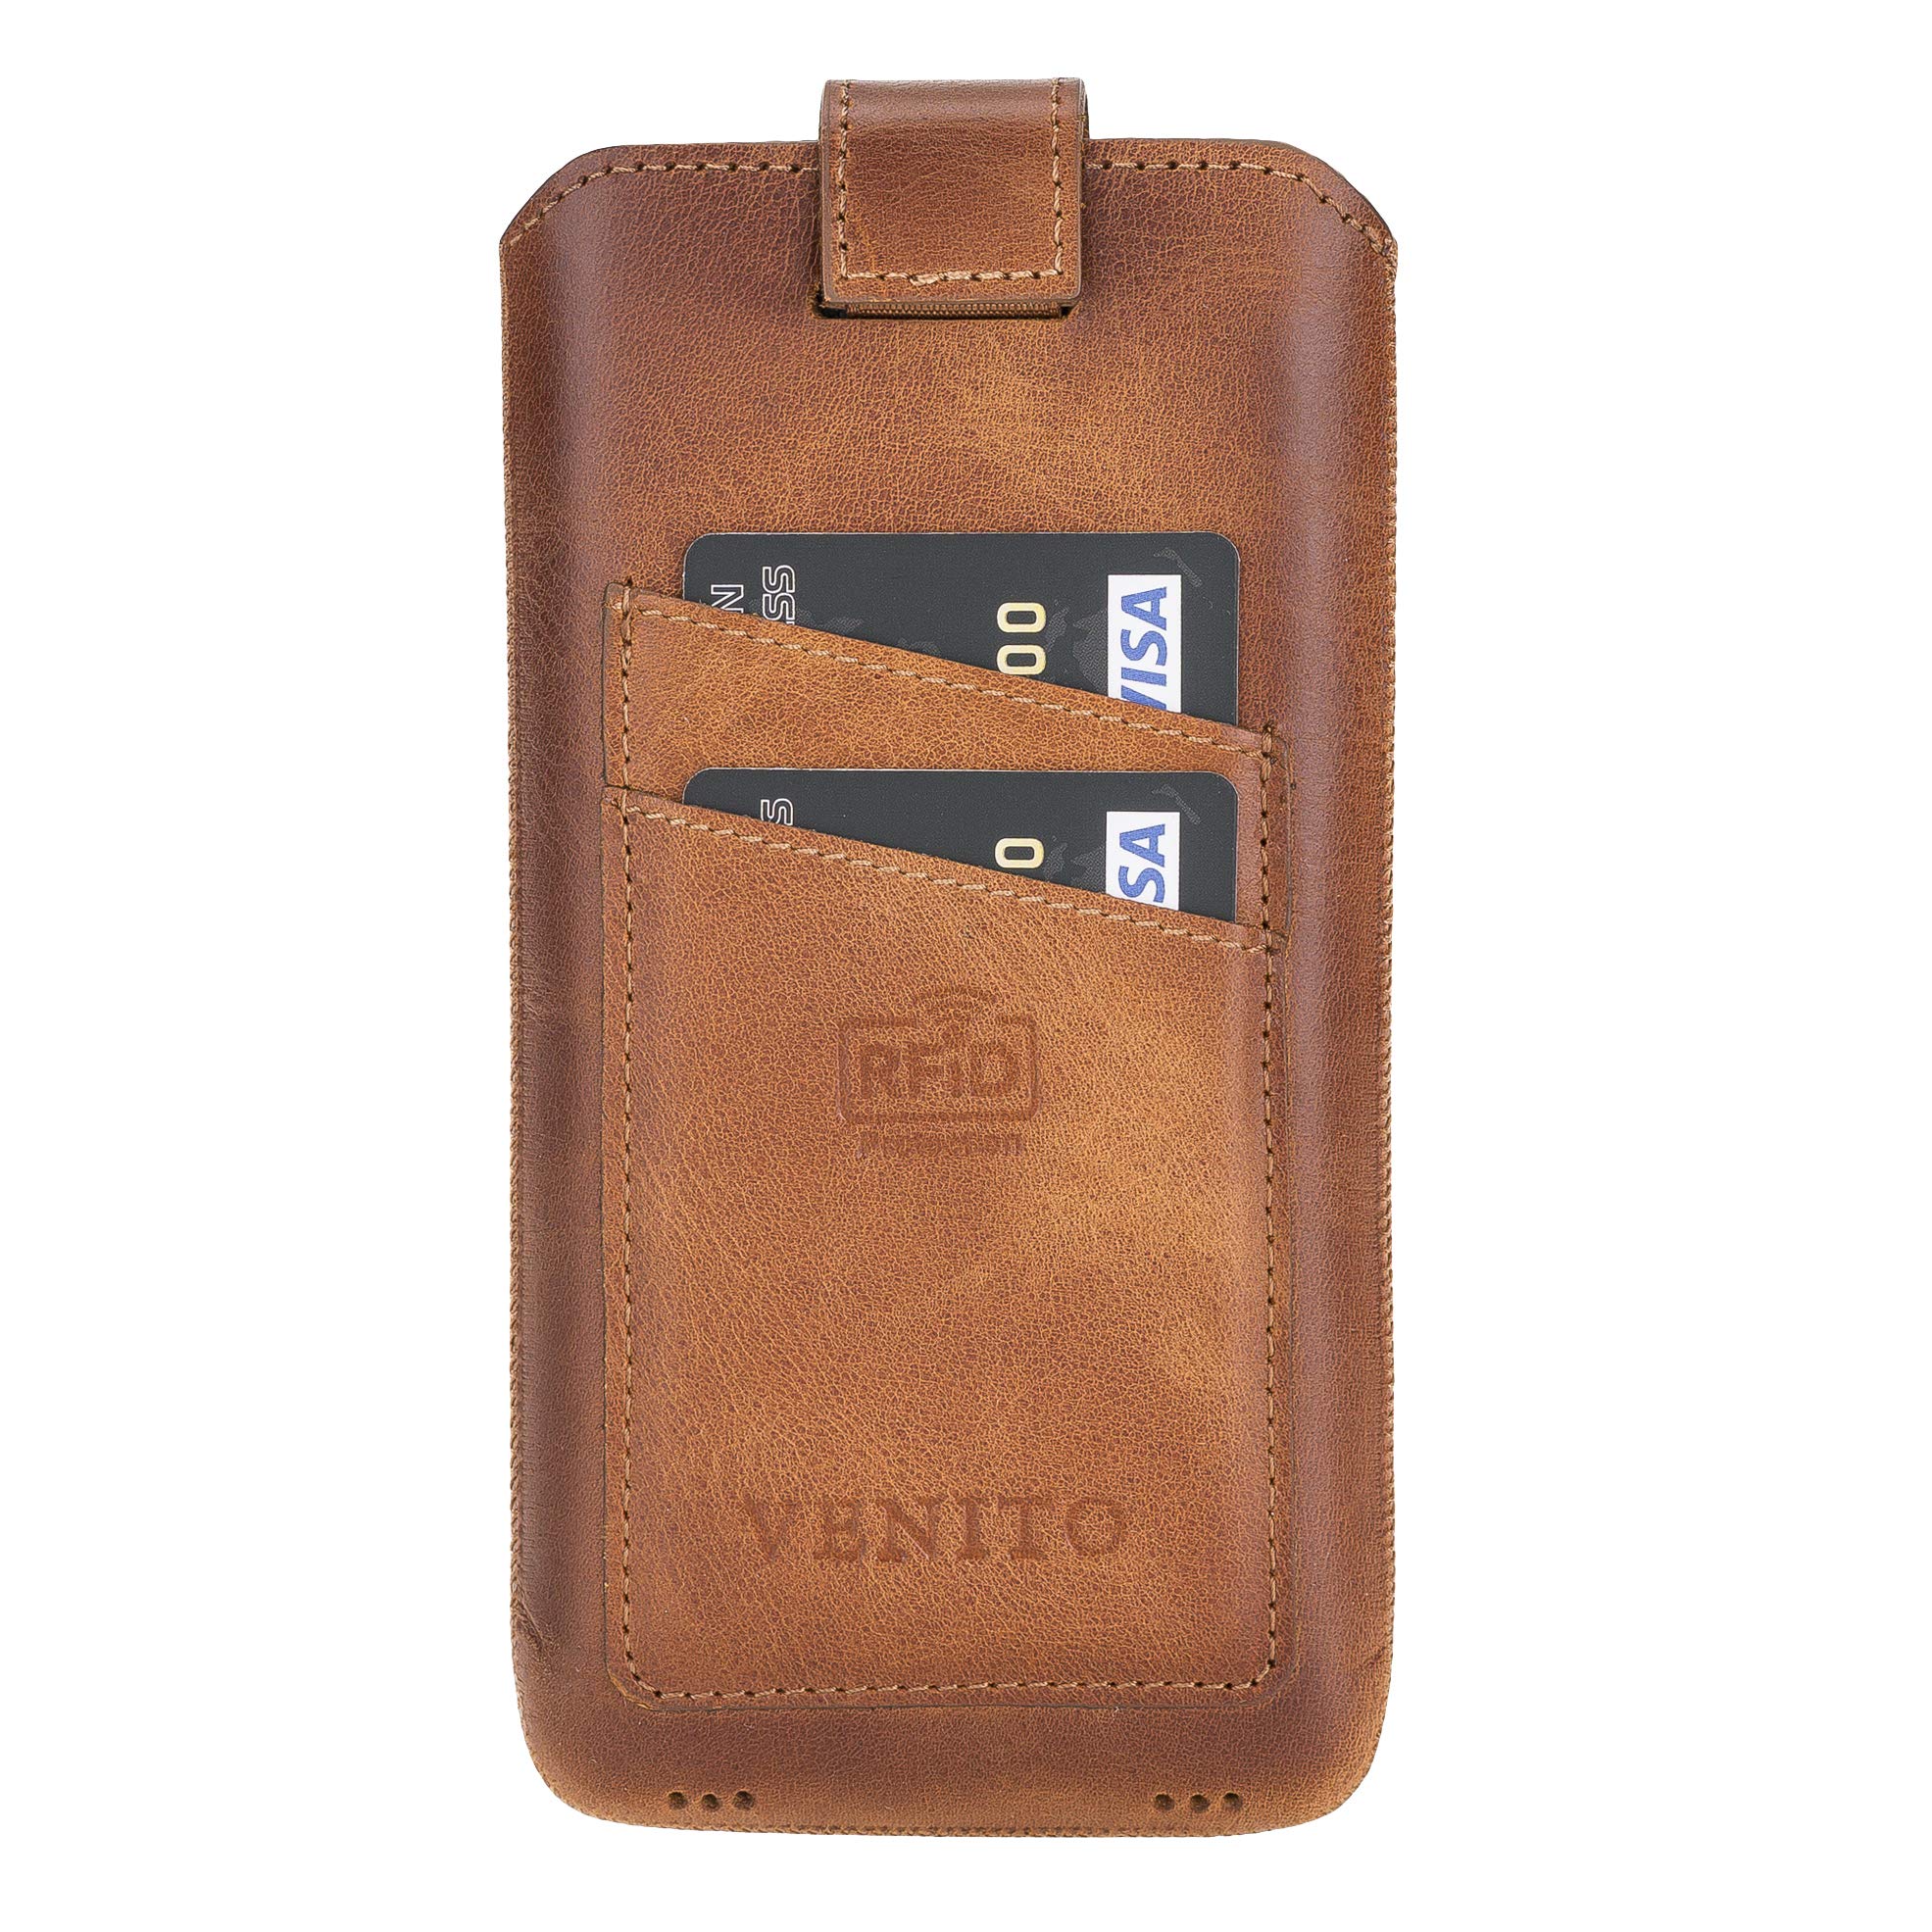 Venito Prato Universal Leather Pouch Case Compatible with iPhone 13 Pro, iPhone 13, iPhone 12, iPhone 12 Pro, iPhone XR and iPhone 11, Galaxy S20, Galaxy S21 - Antique Brown